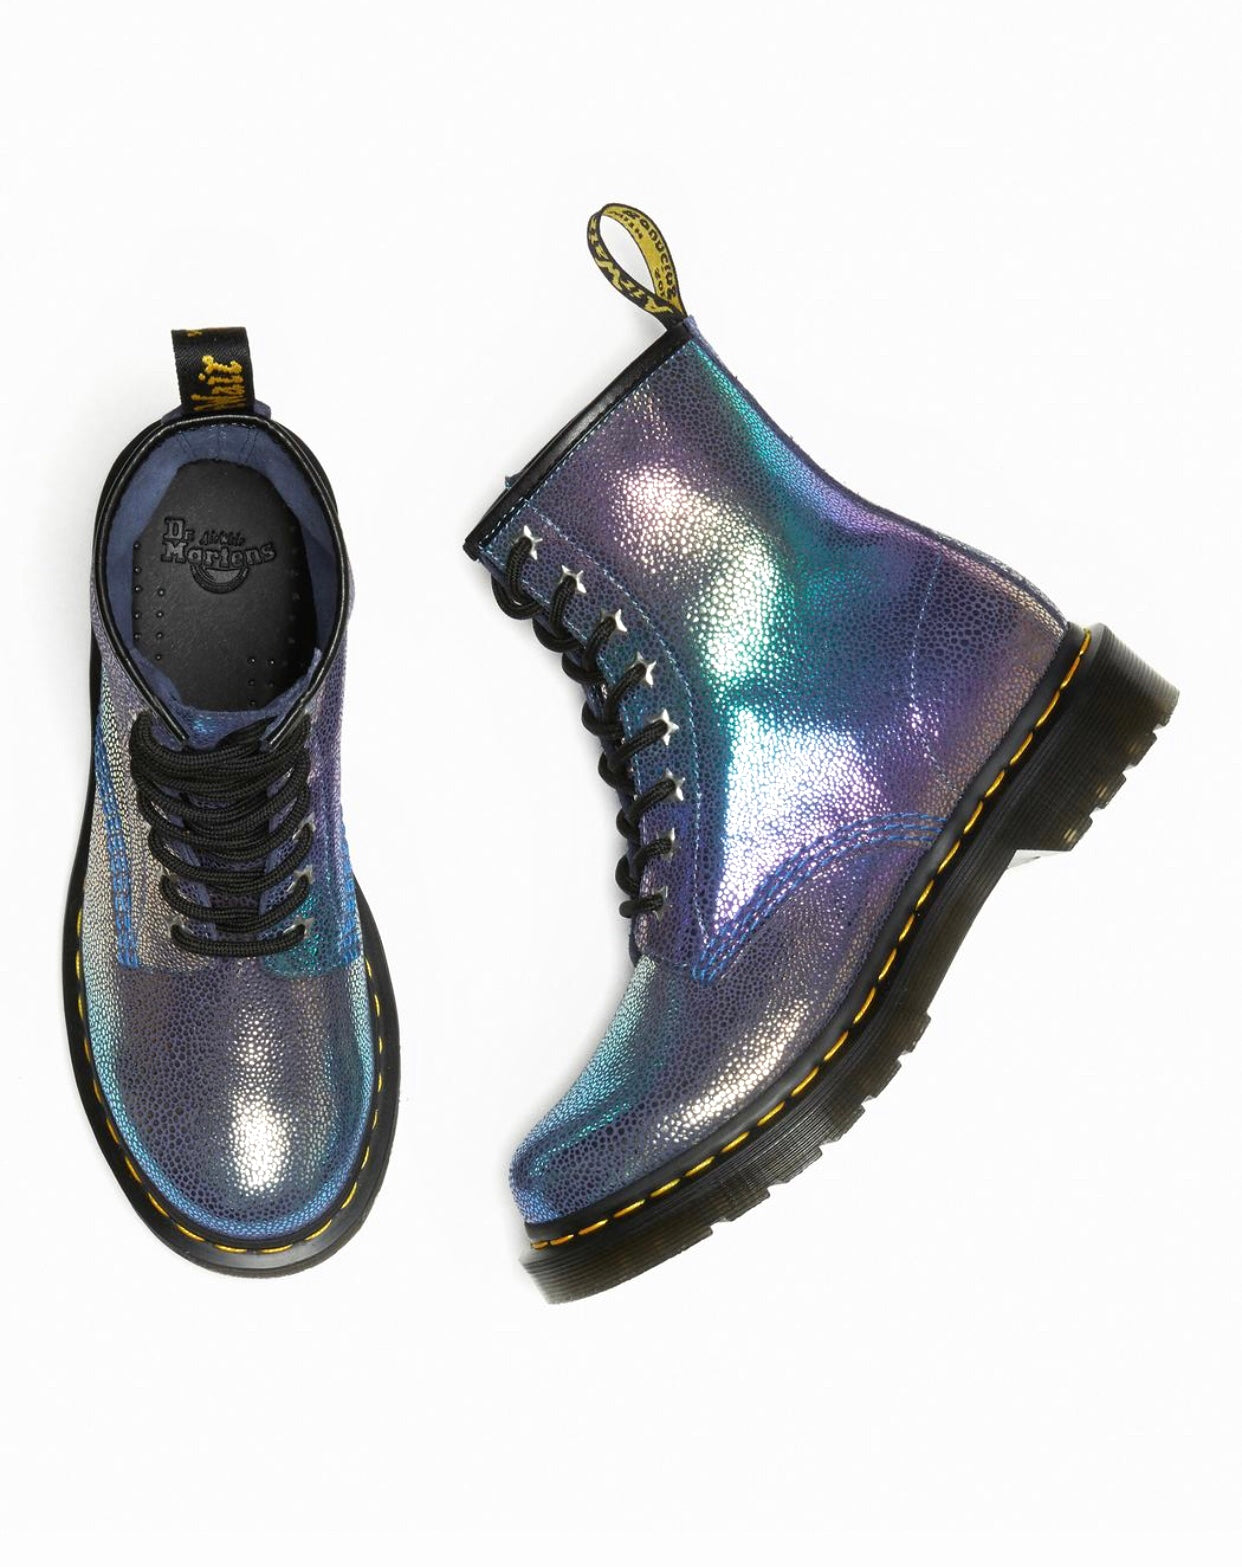 Dr. Martens 1460 Purple Rainbow Ray Ankle 8 Eyelet Boot